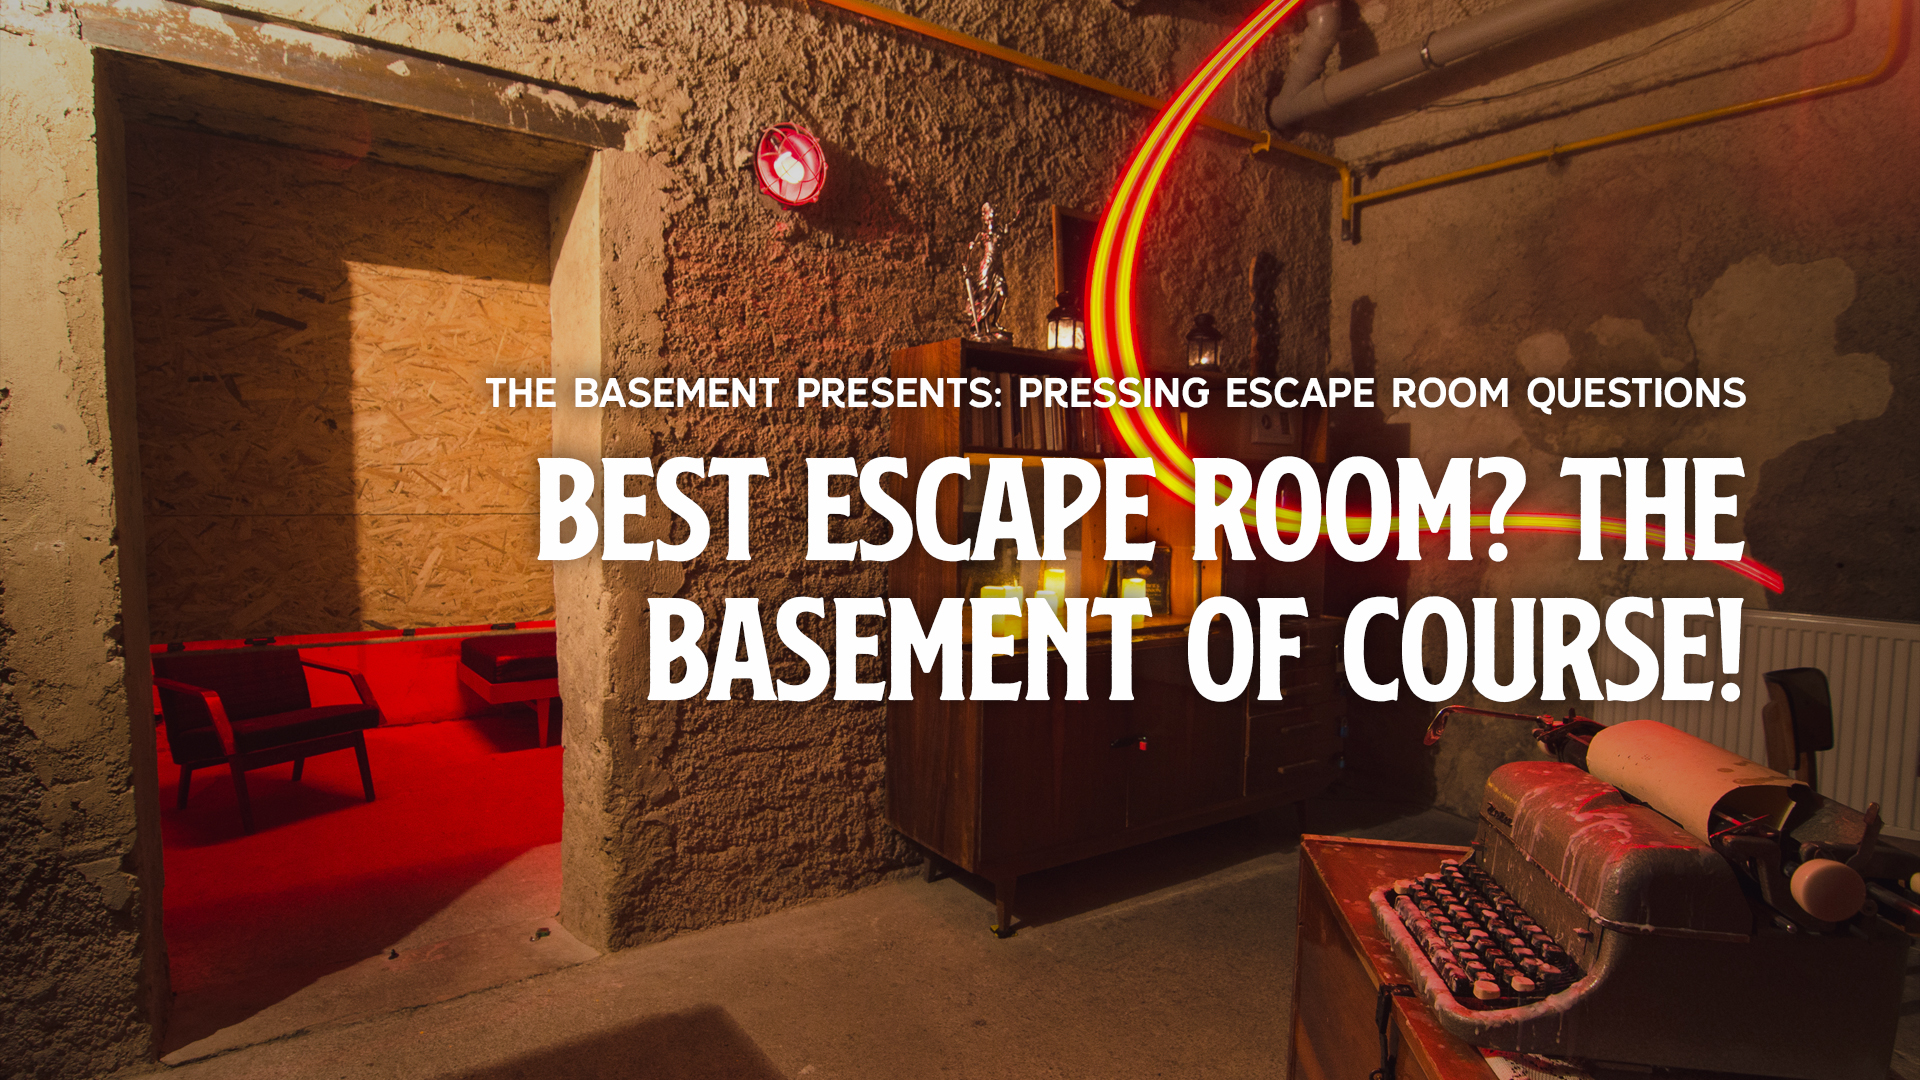 BEST ESCAPE ROOM? THE BASEMENT LIVE ESCAPE ROOM EXPERIENCE OF COURSE!